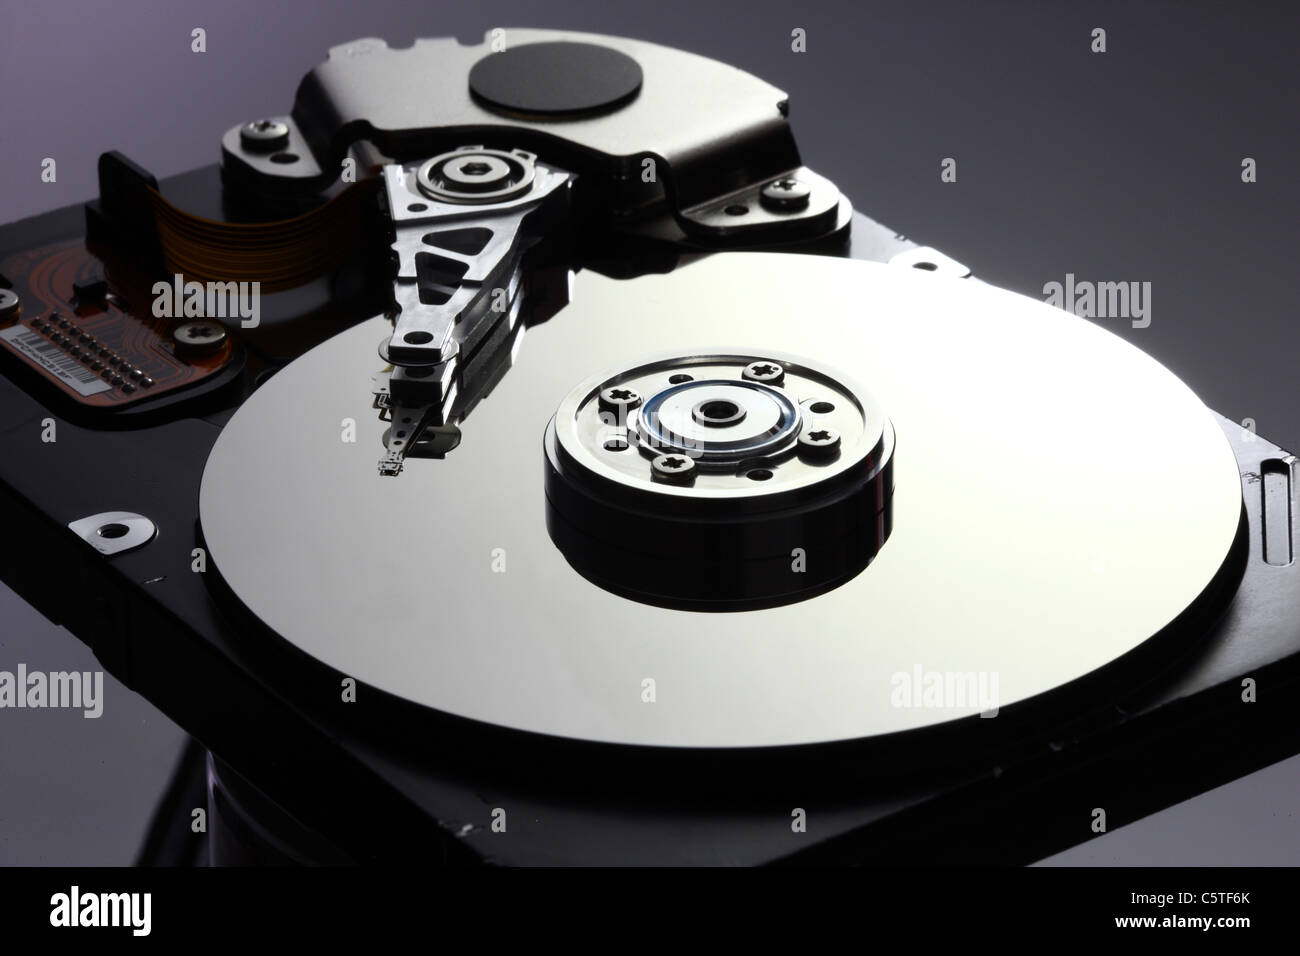 Computer hard drive, opened, reading/writing head and hard disk. Stock Photo